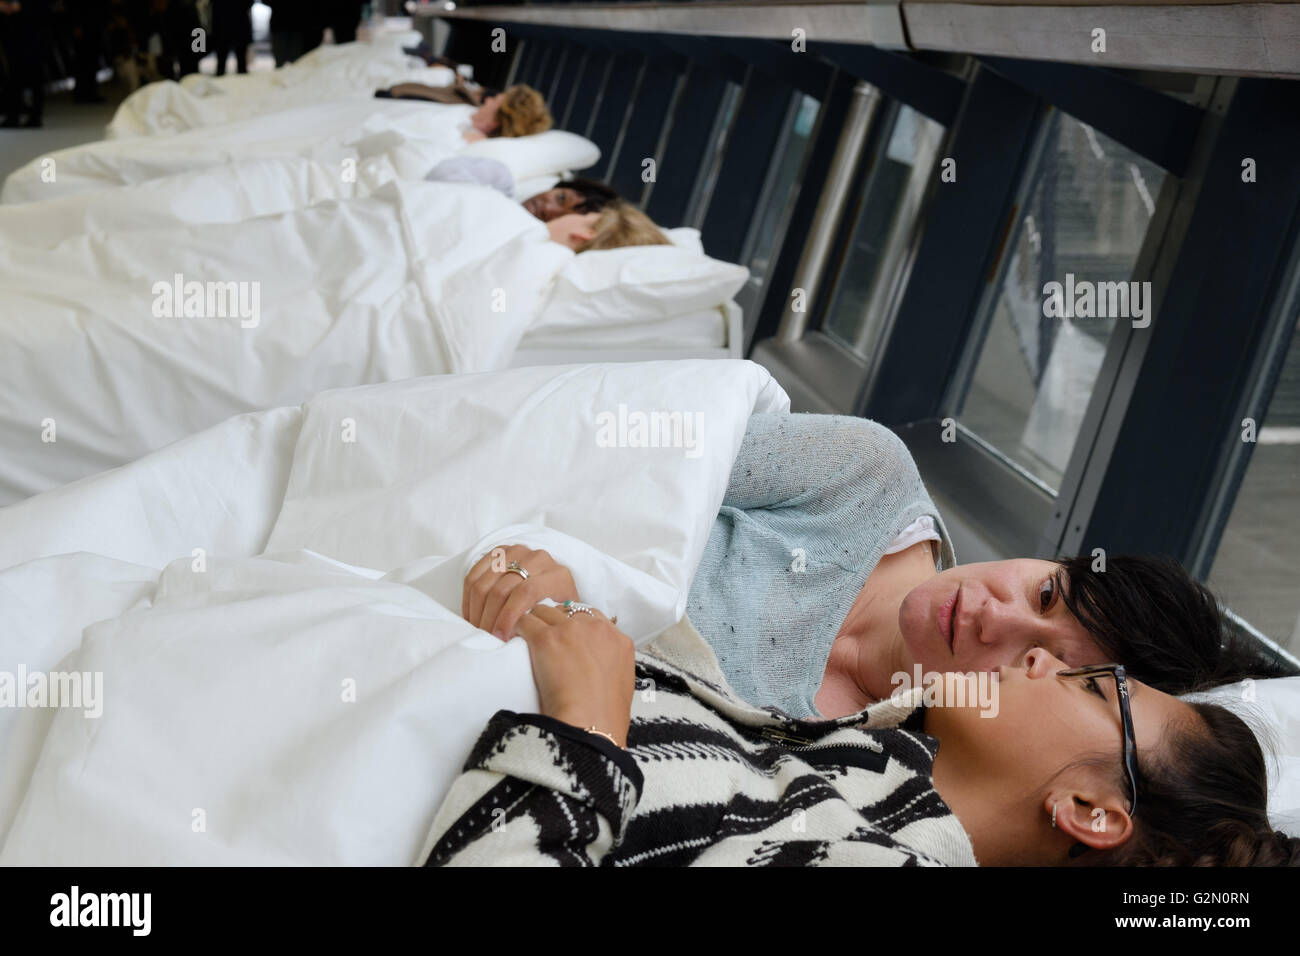 EDITORIAL USE ONLY Everything by my side, a theatrical performance that sees actors in white beds whisper to individual audience members, created by Argentinian artist Fernando Rubio, is unveiled as it makes its UK debut at Canary Wharf in London. Stock Photo